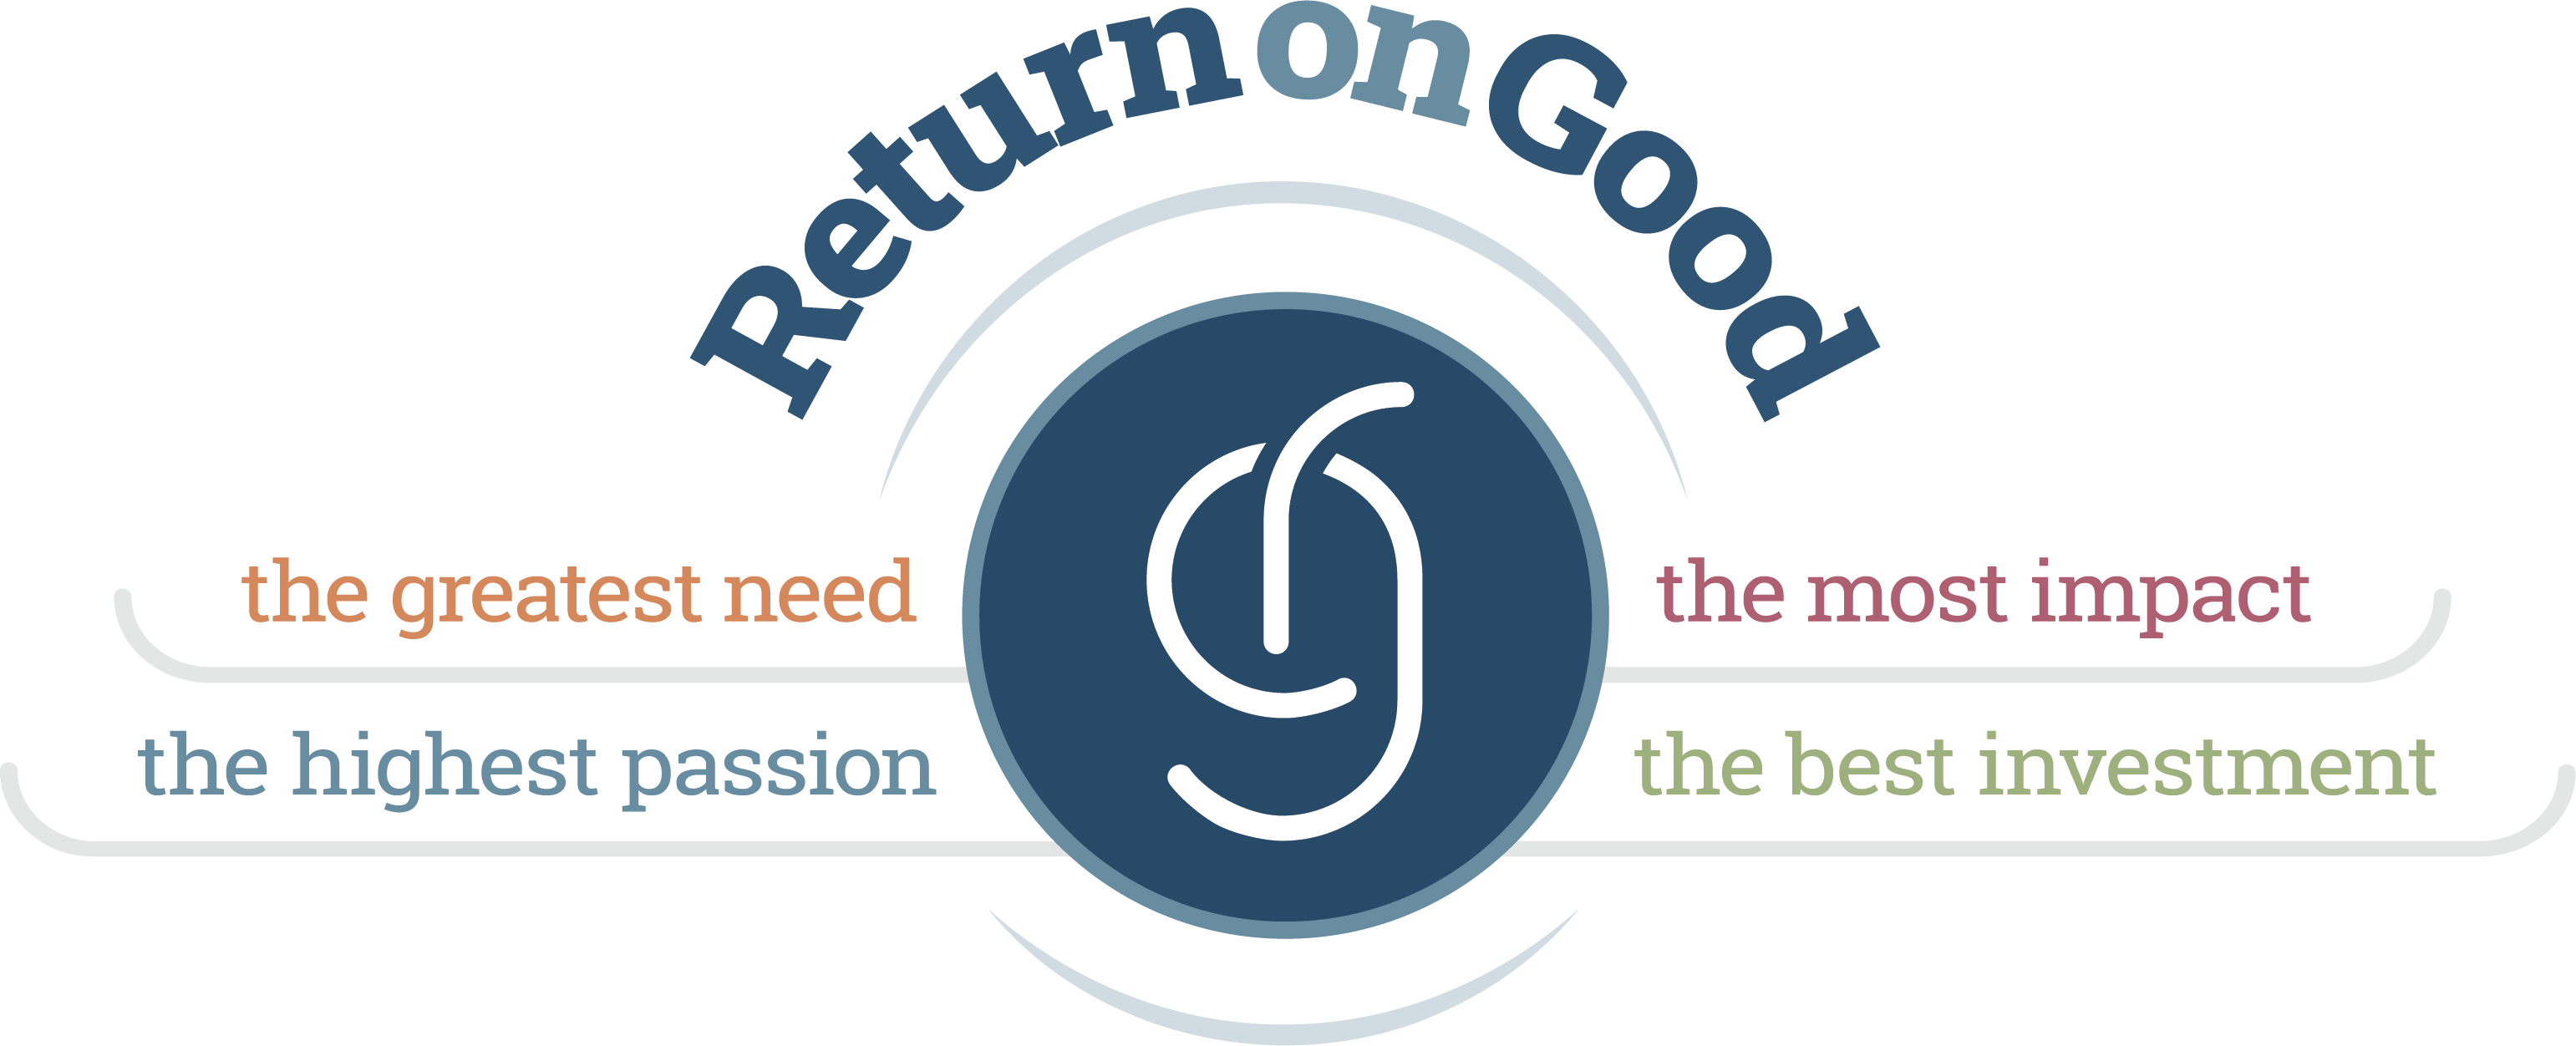 Digging Into the Return on Good Vision